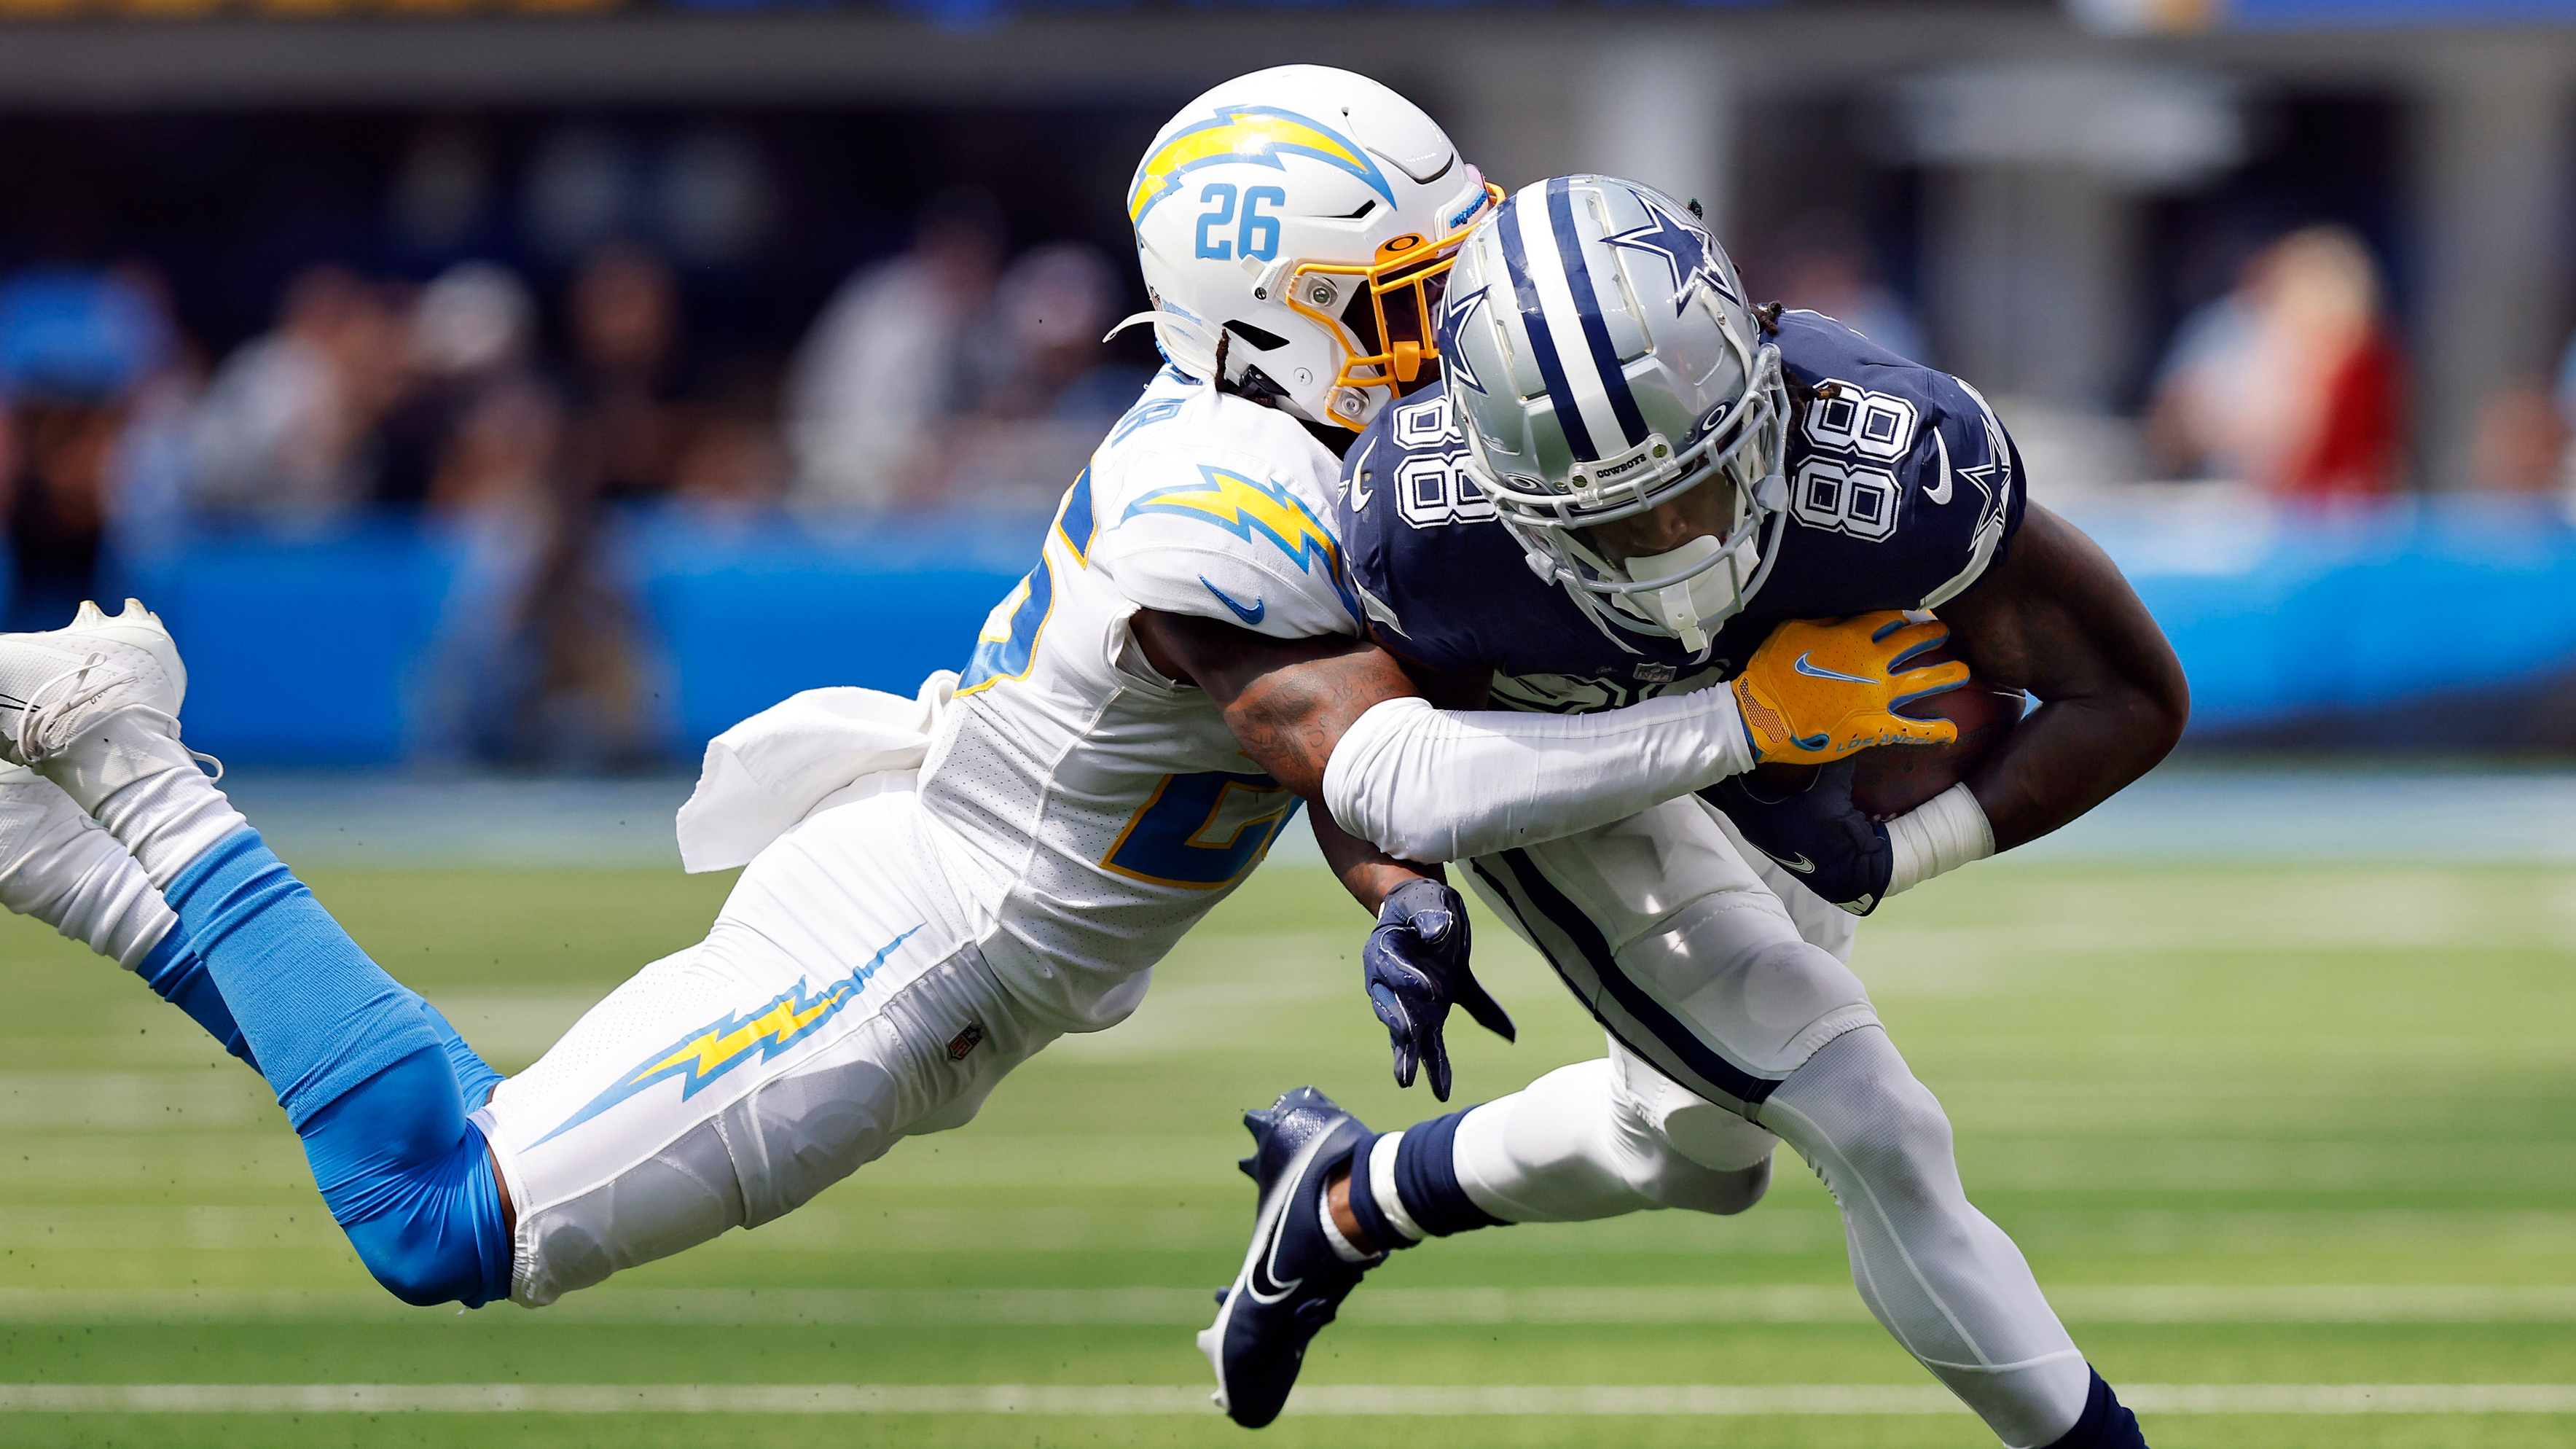 cowboys vs chargers live stream